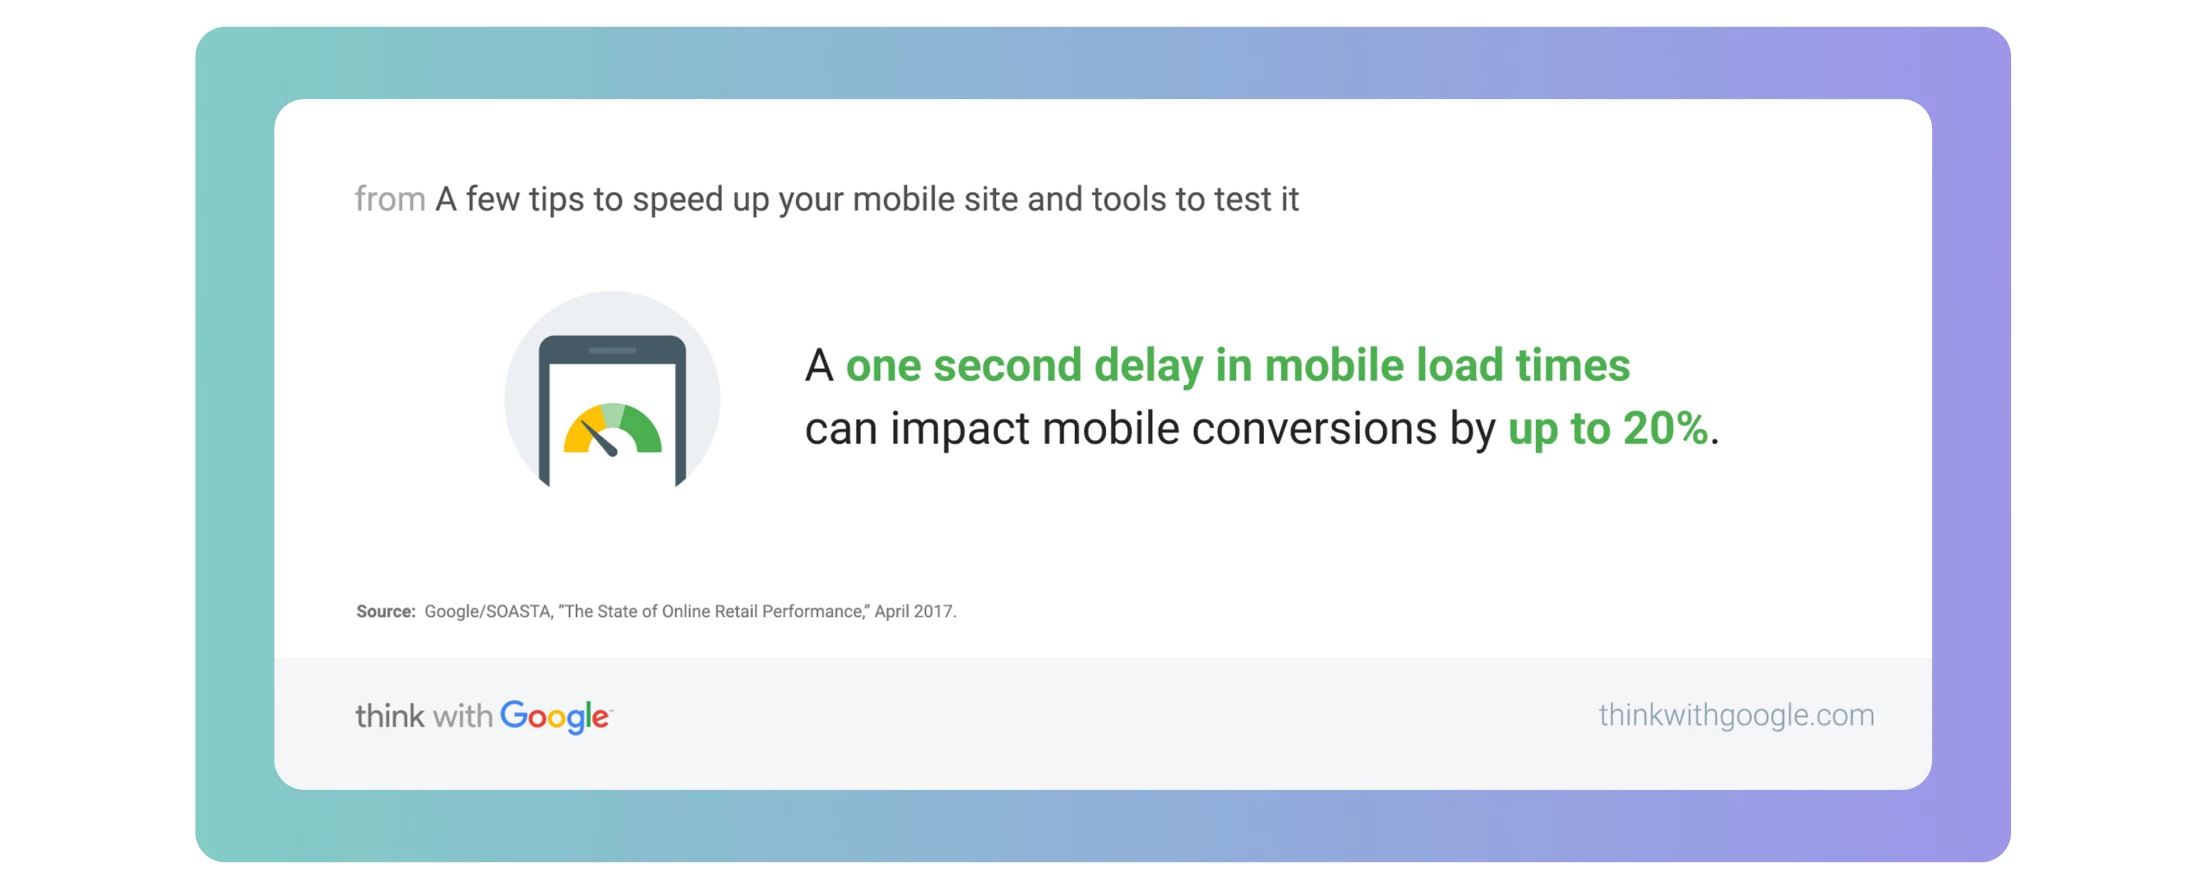 Tips to speed up your mobile site